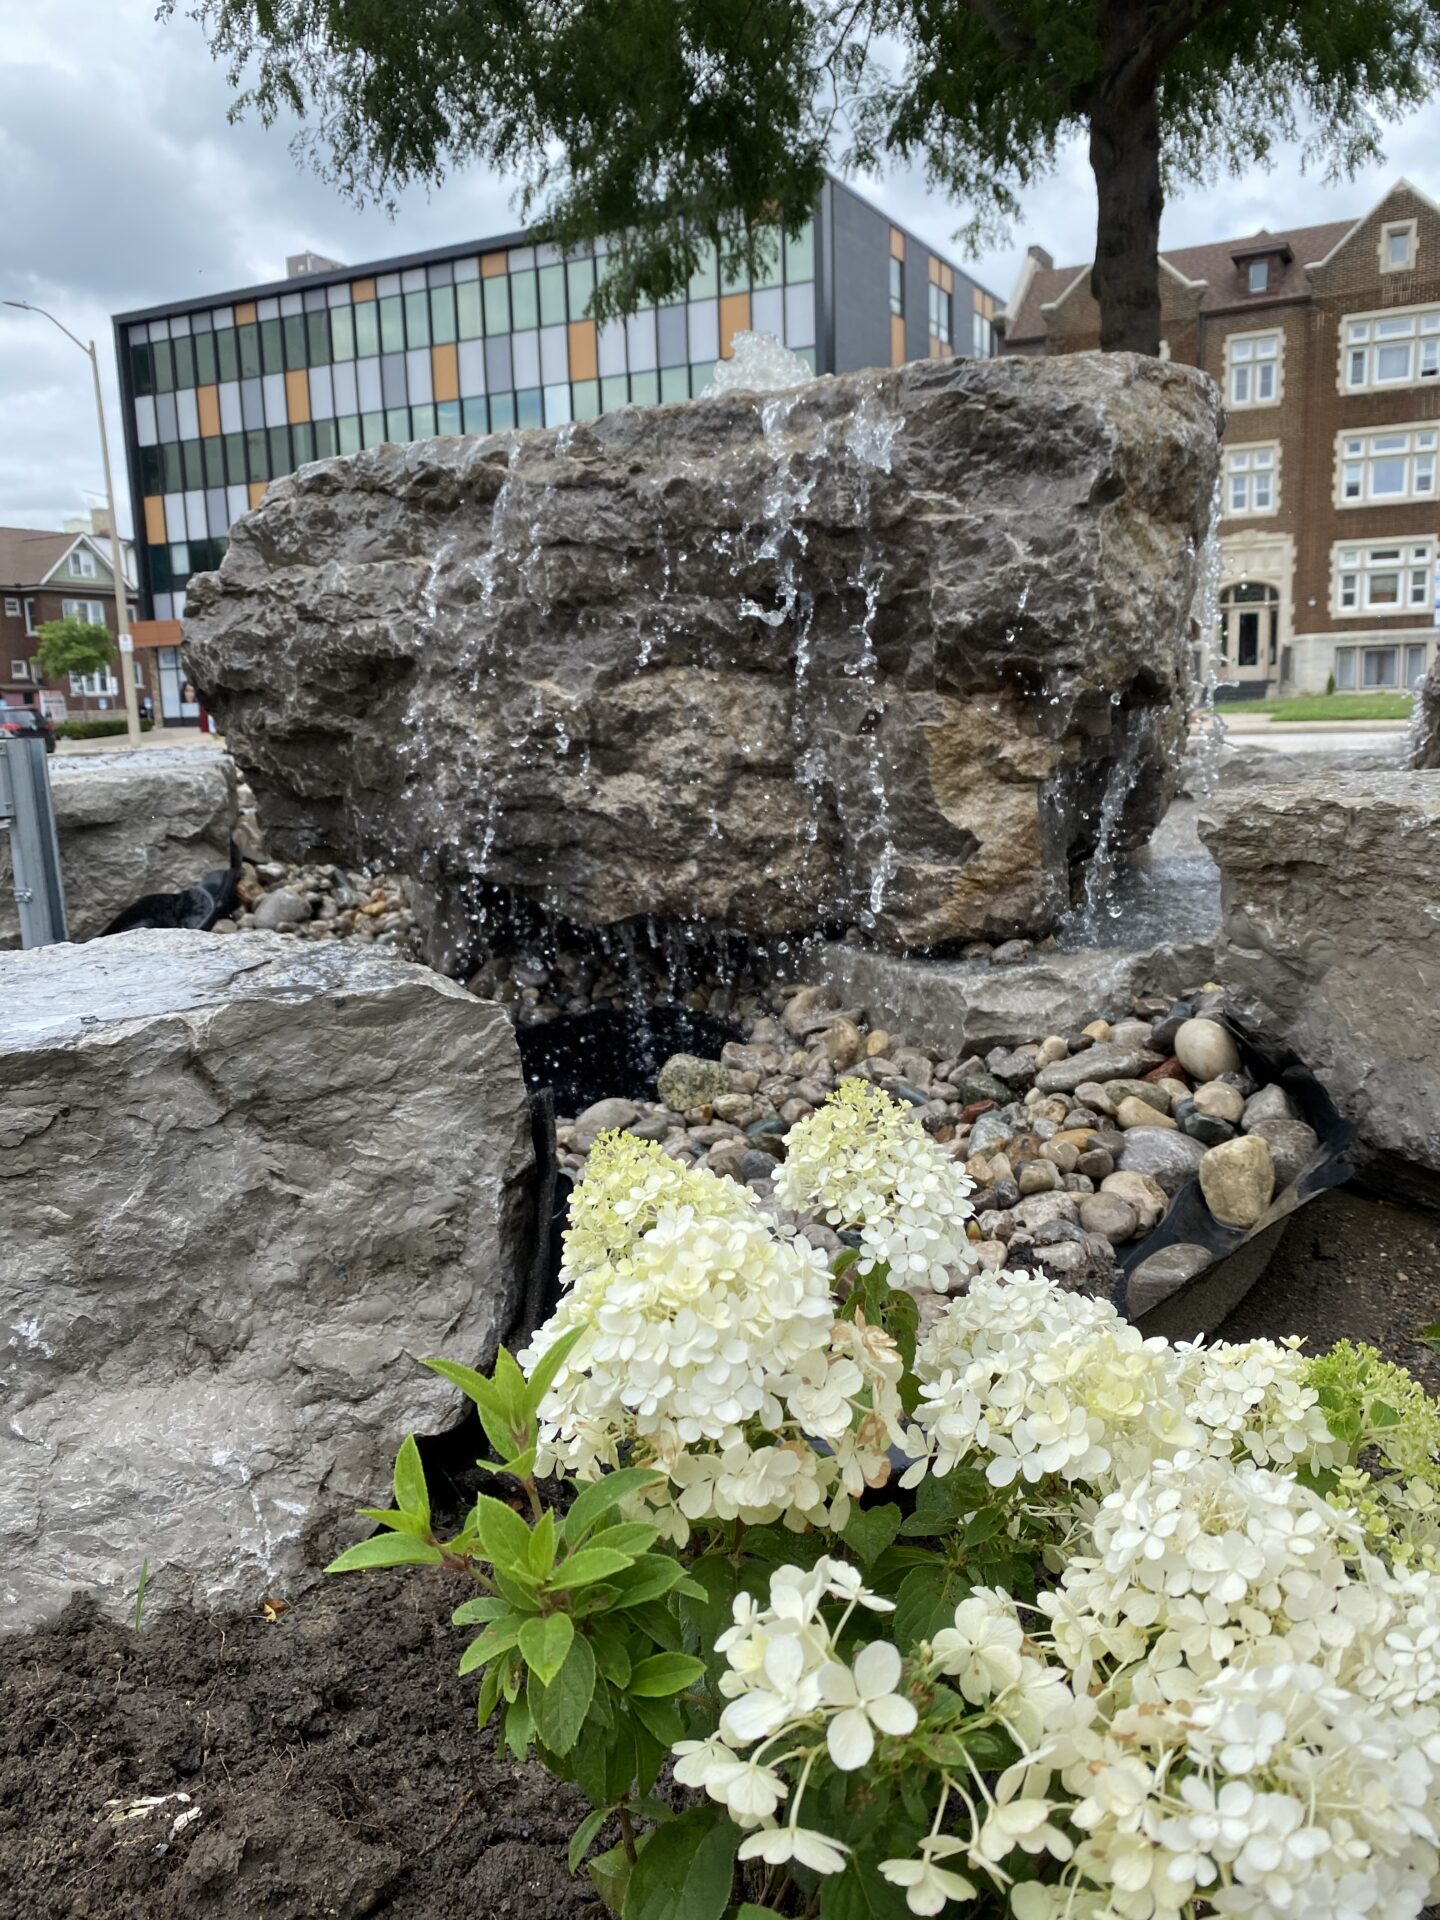 An artificial waterfall cascades over rocks, flanked by blooming white hydrangeas, with urban buildings and a tree in the background.